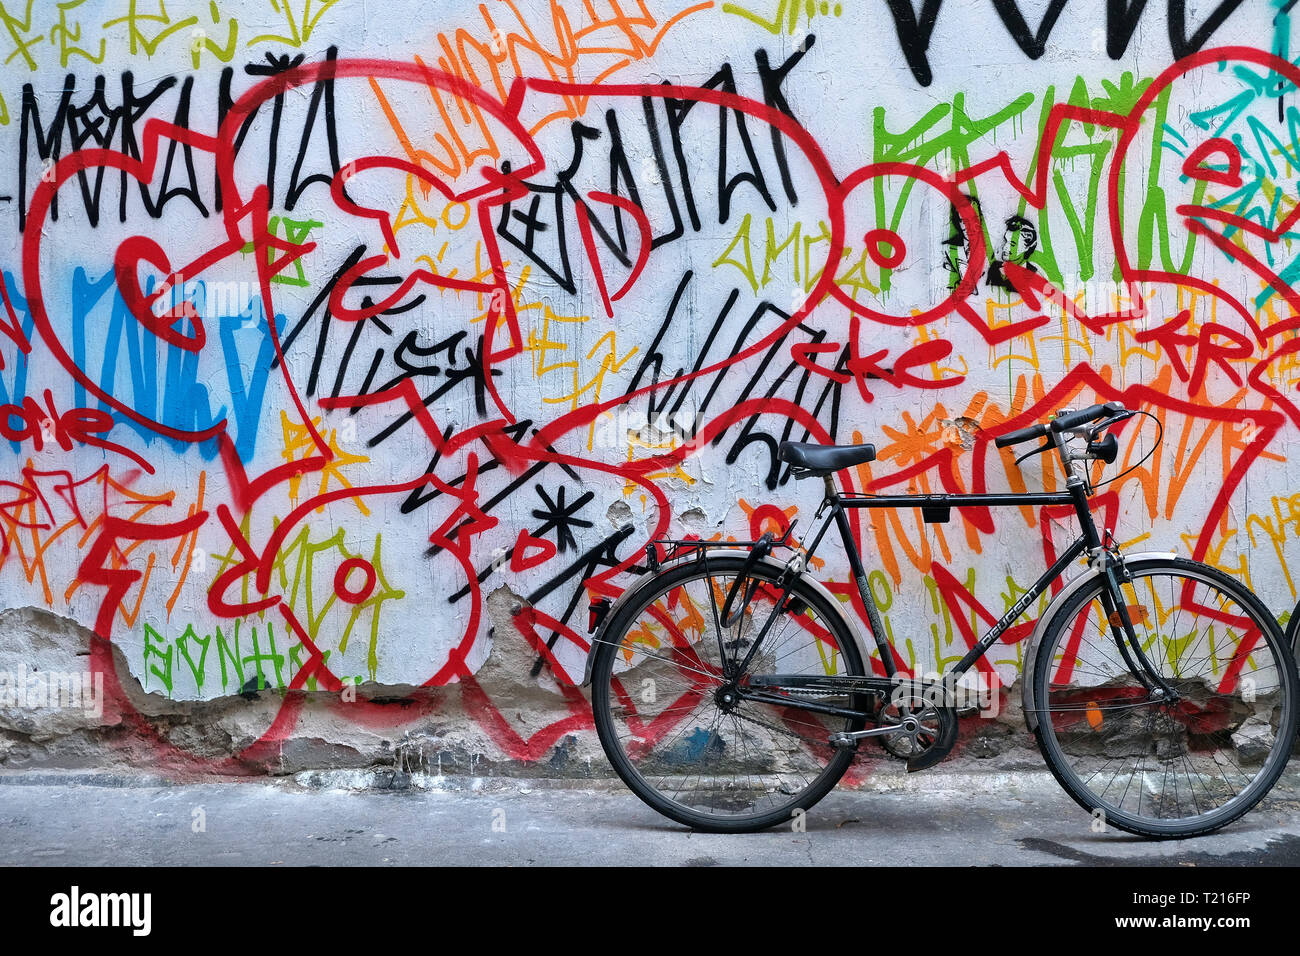 Bicycle in front of colorfully painted wall. Stock Photo